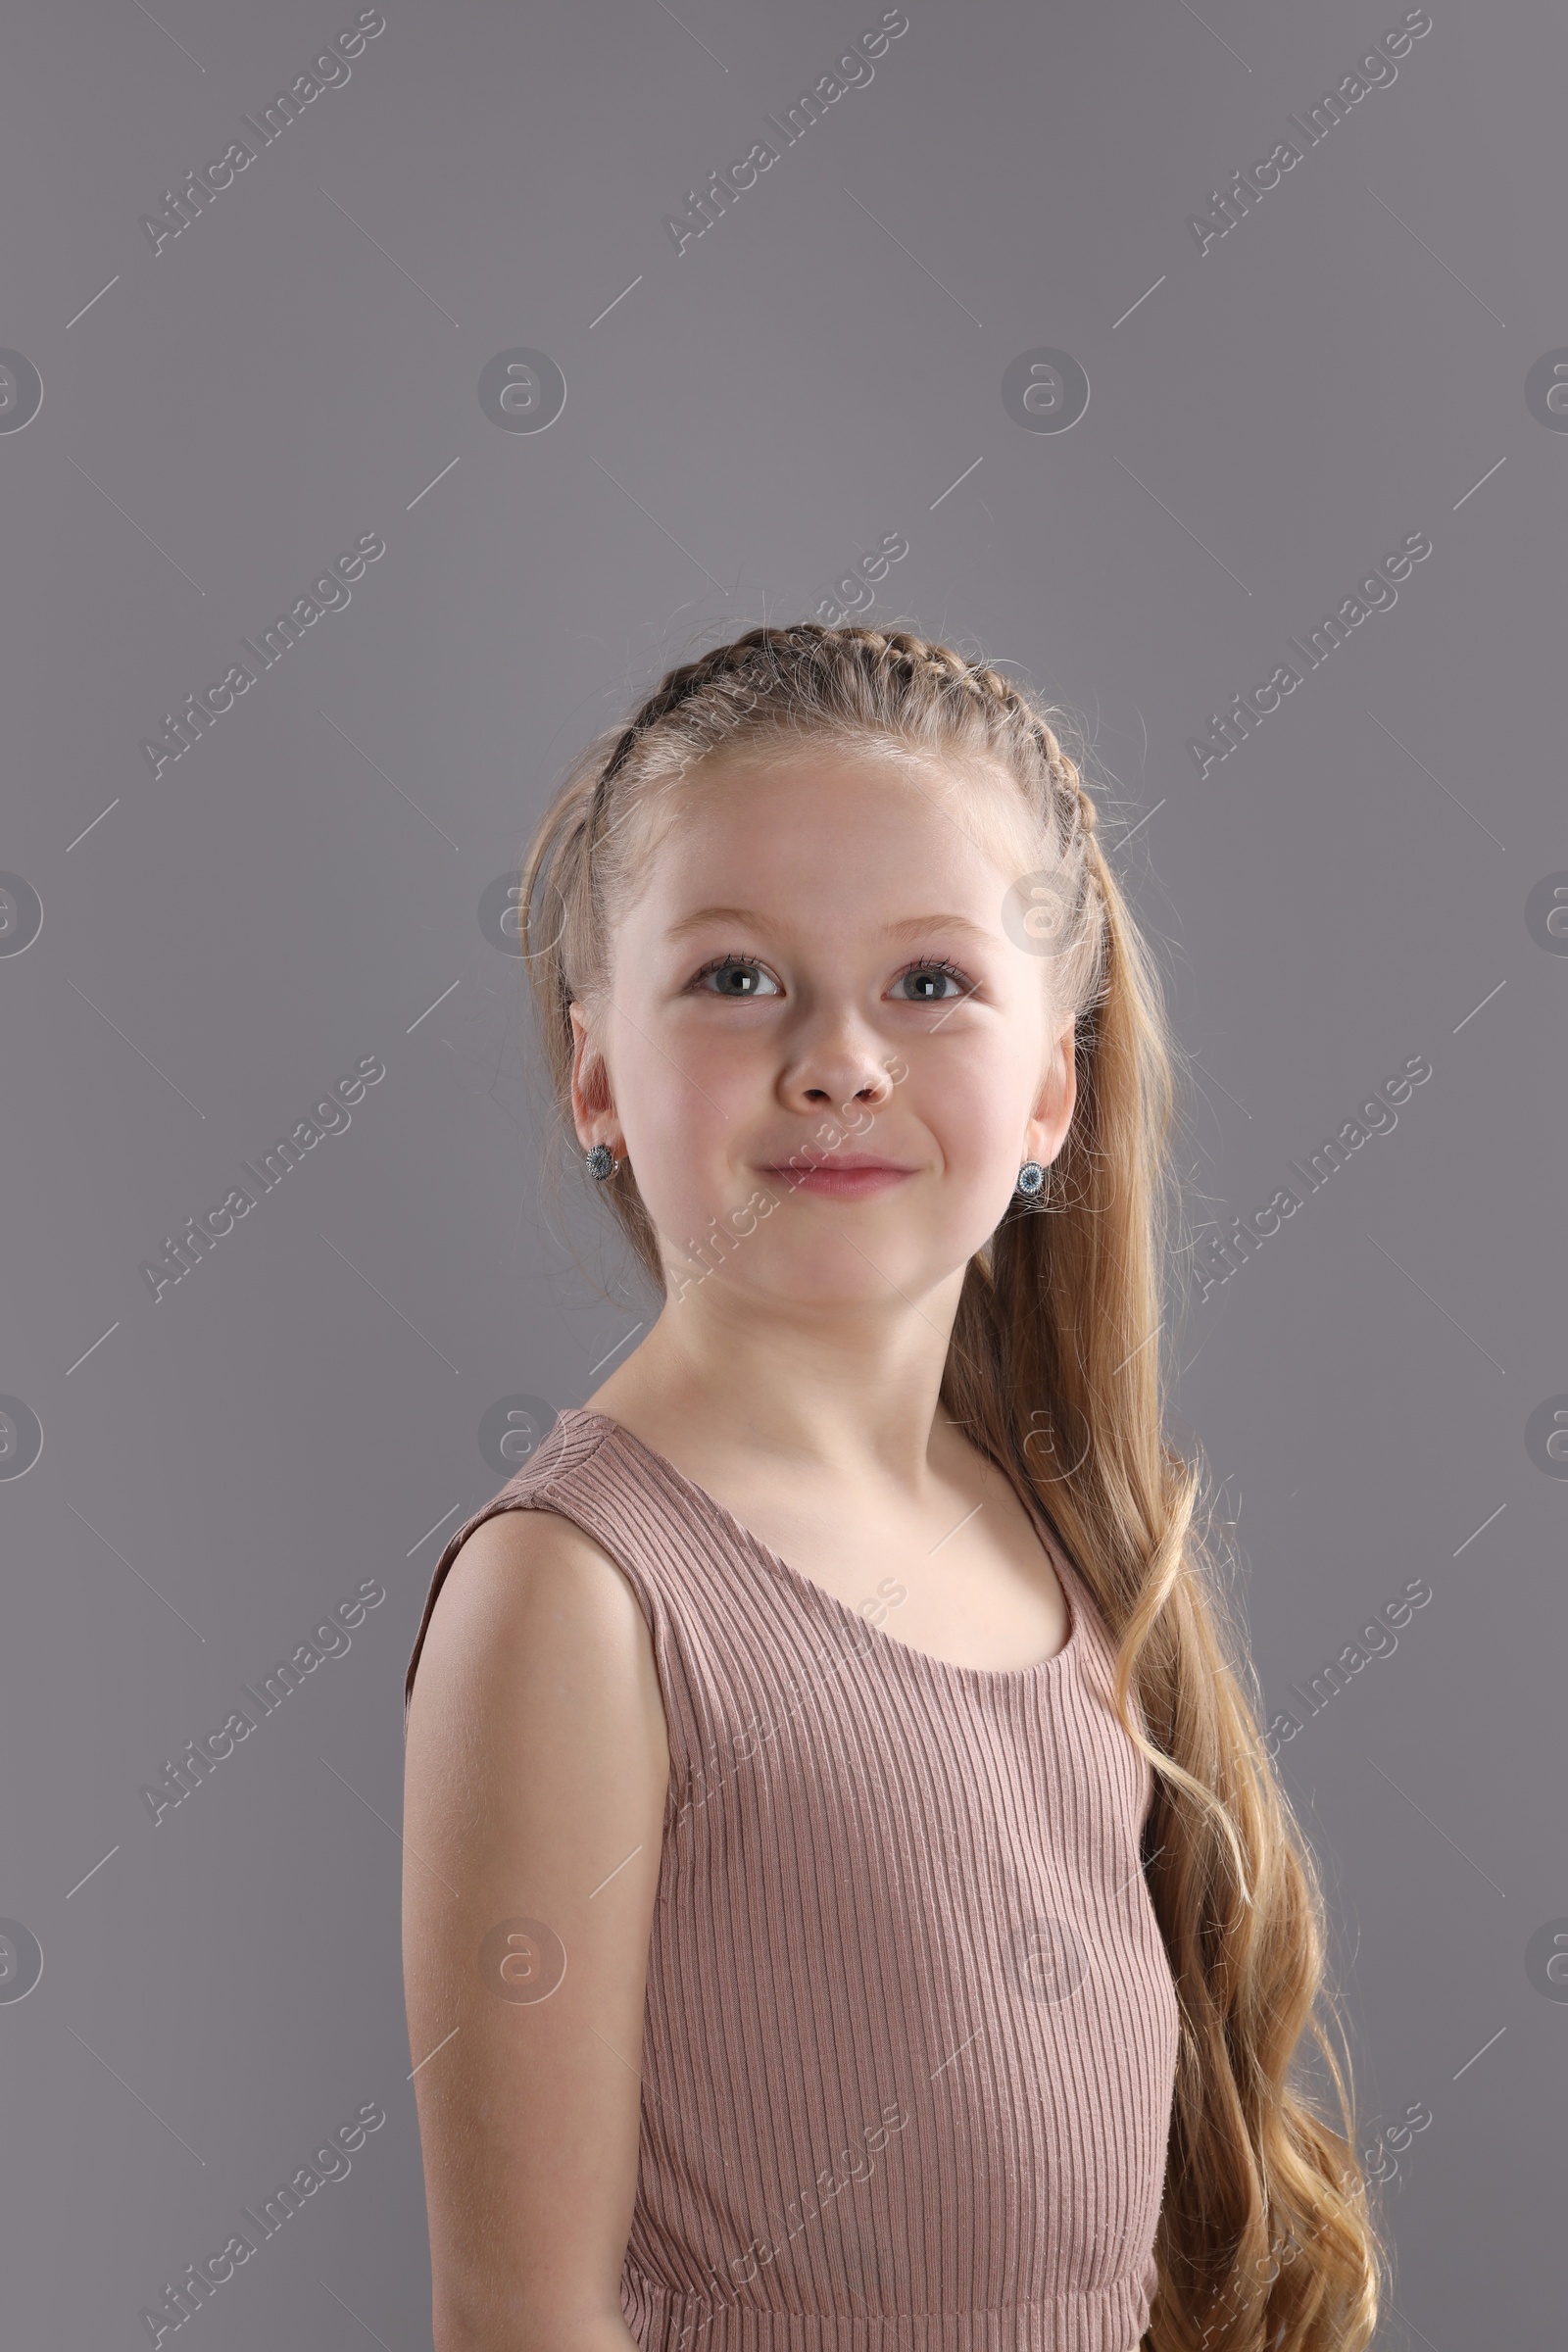 Photo of Little girl with braided hair on grey background